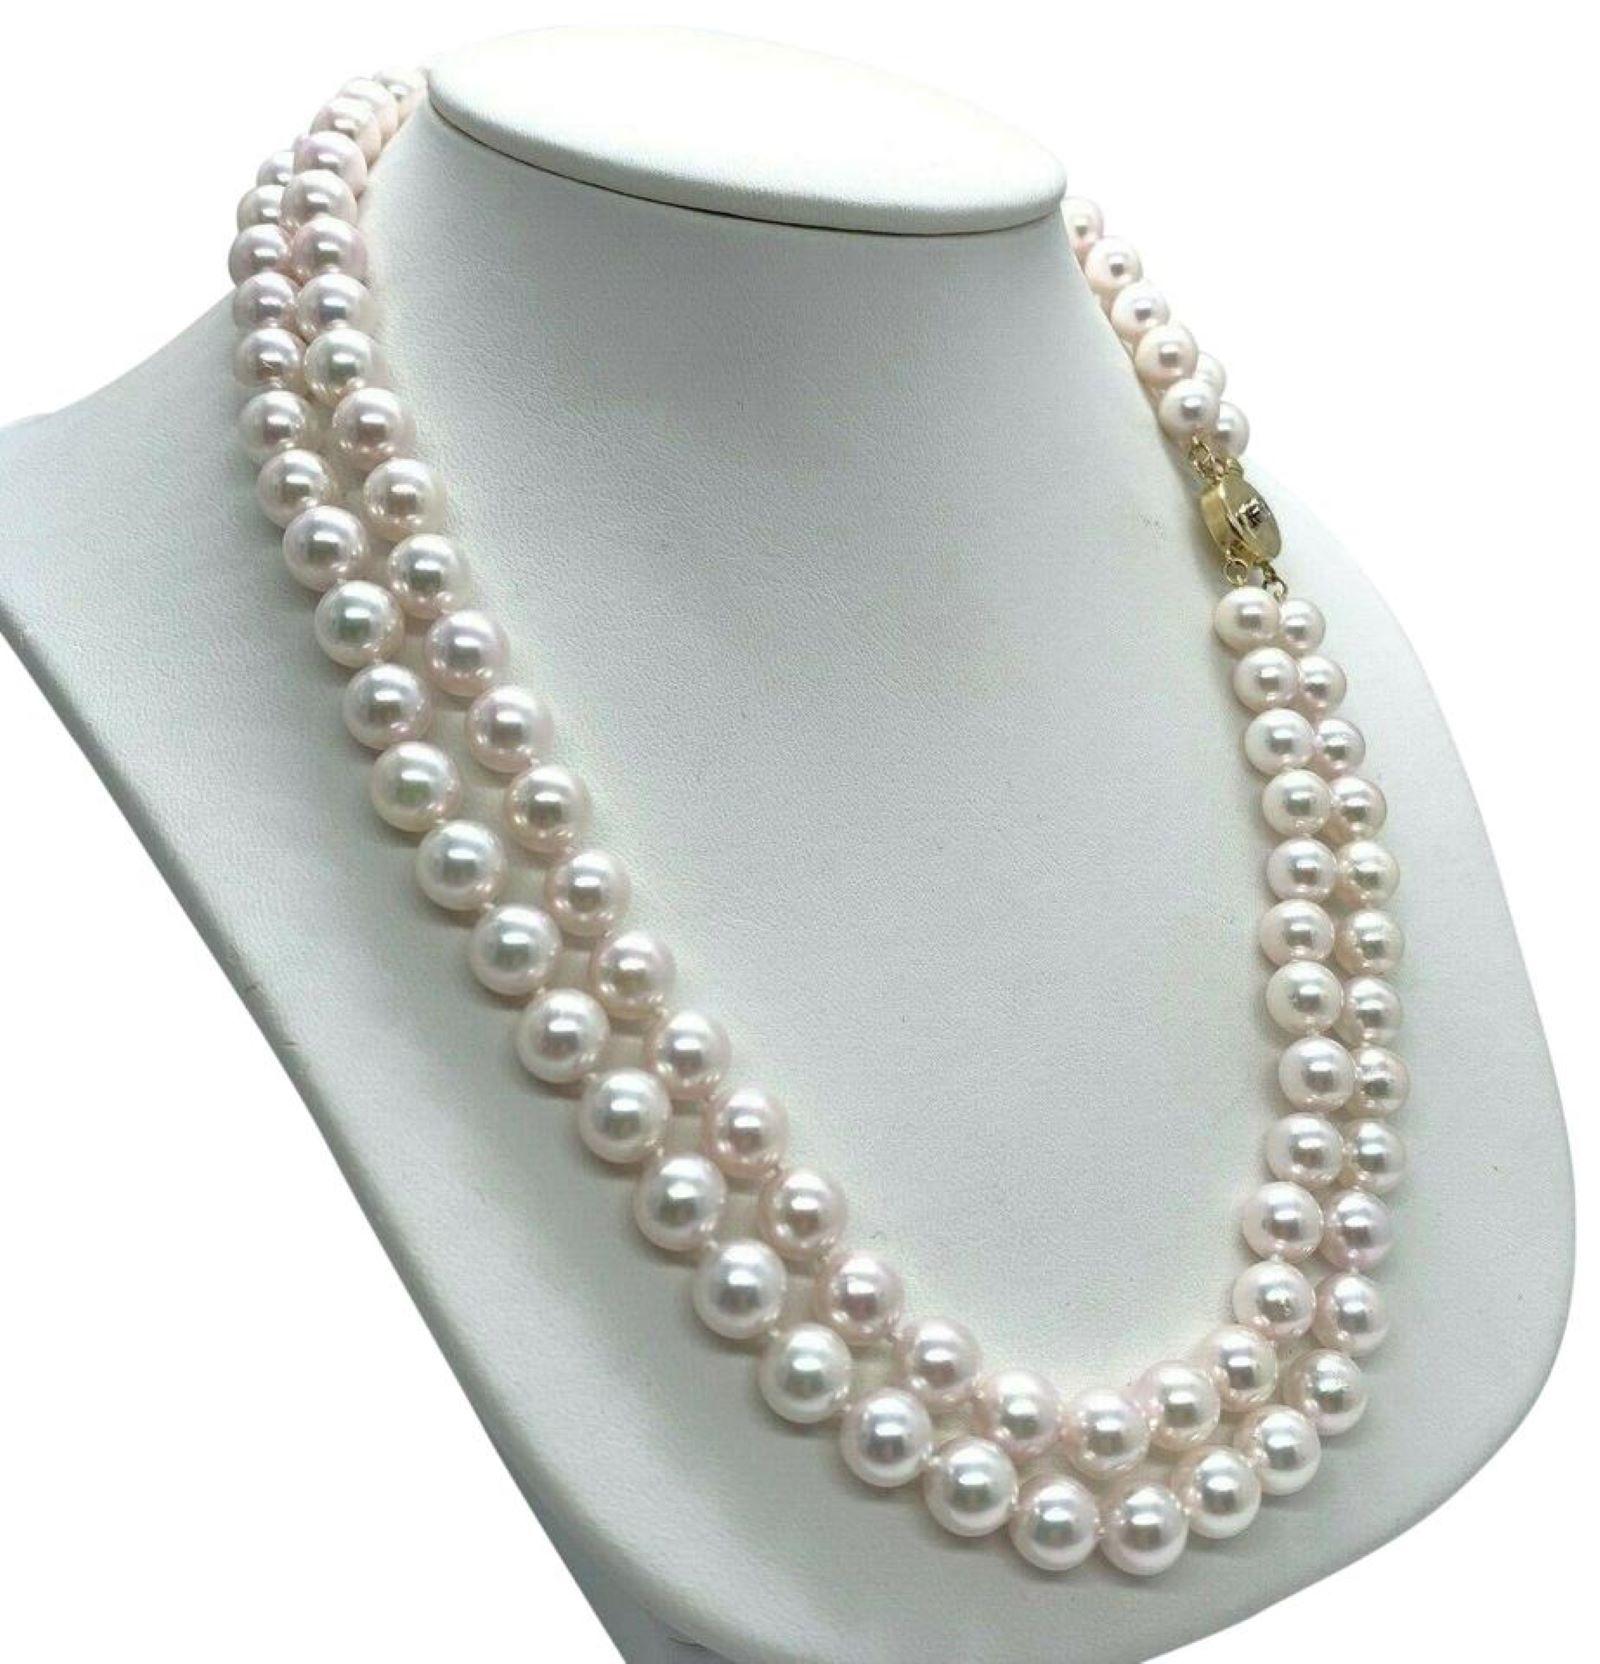 Certificate #201920209

Certified $5,950 Unique High Fashion Authentic Fine Quality Akoya White PEARL 14 KT Gold Double Strand NECKLACE

This is a One of a Kind Unique Custom Made Glamorous Piece of Jewelry!!

Nothing says, “I Love ❤️ you” more than